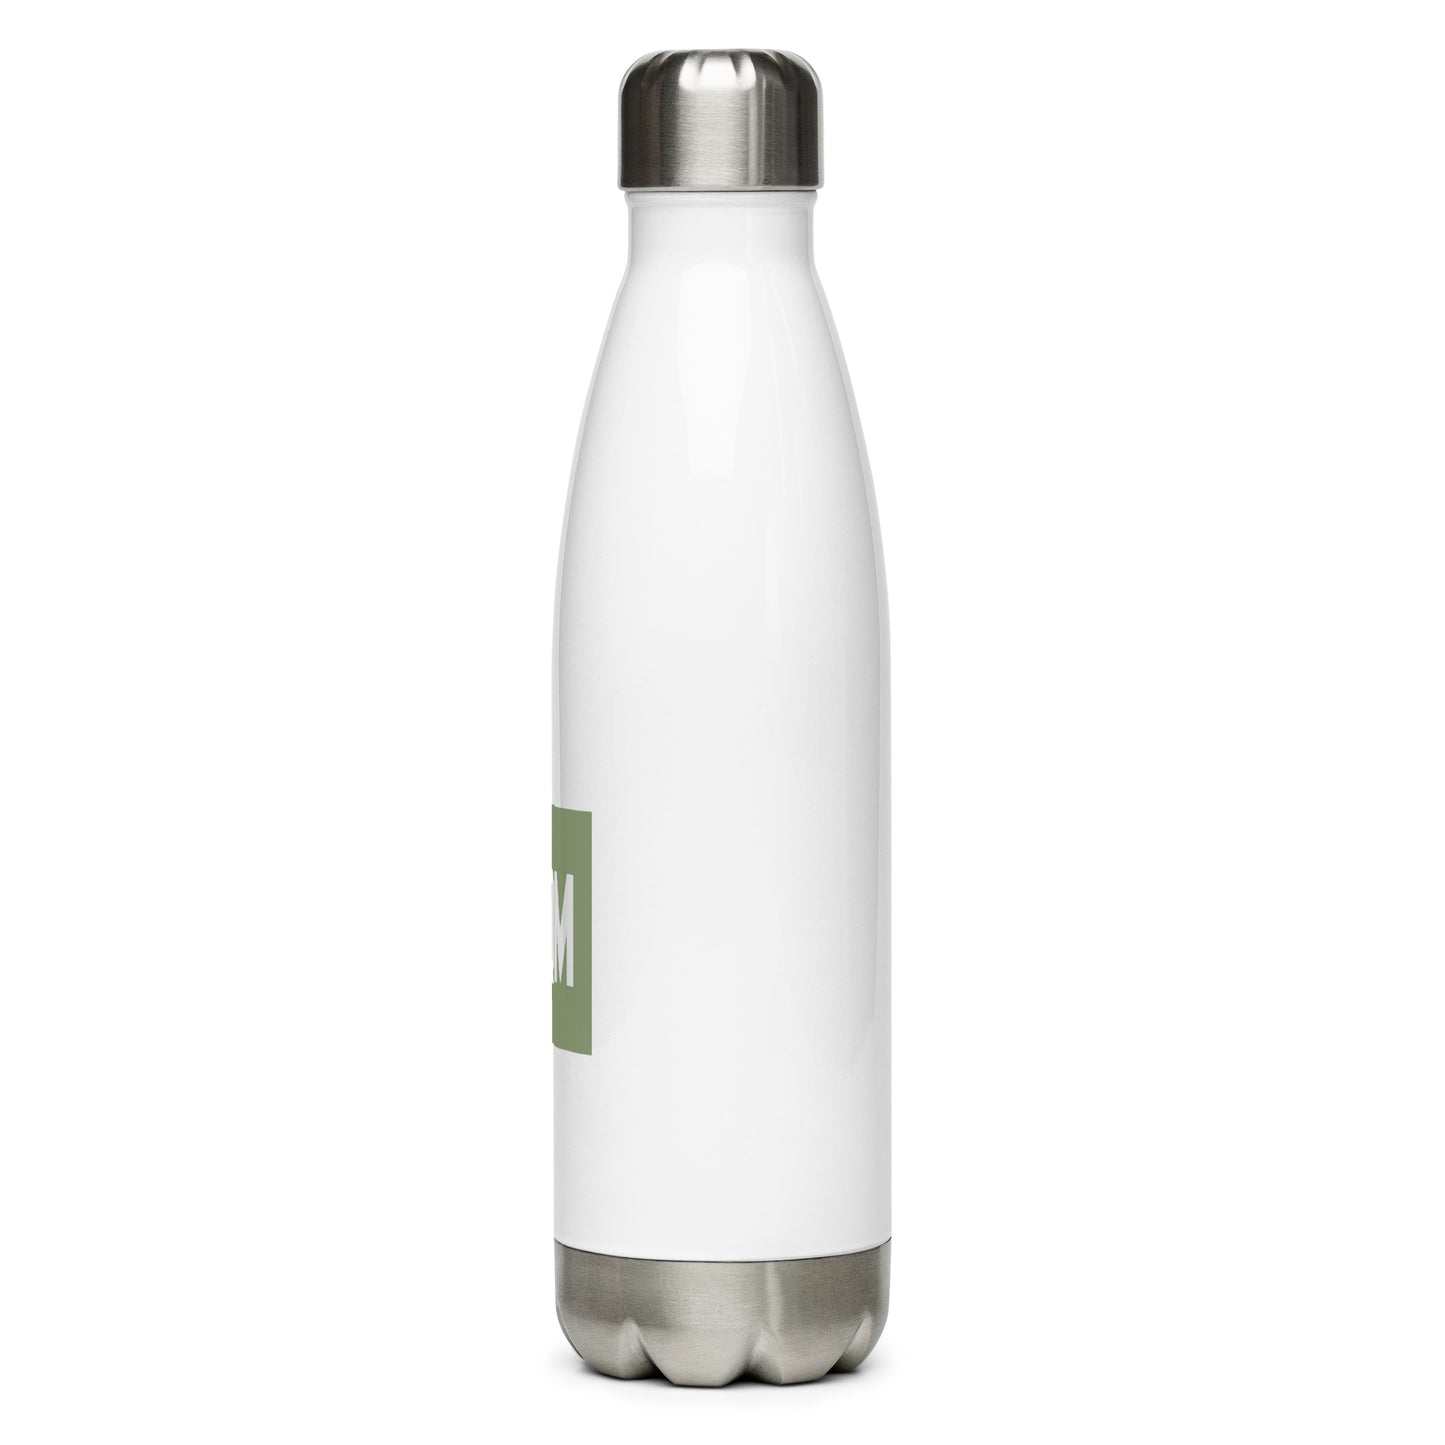 Aviation Gift Water Bottle - Camo Green • YQM Moncton • YHM Designs - Image 08